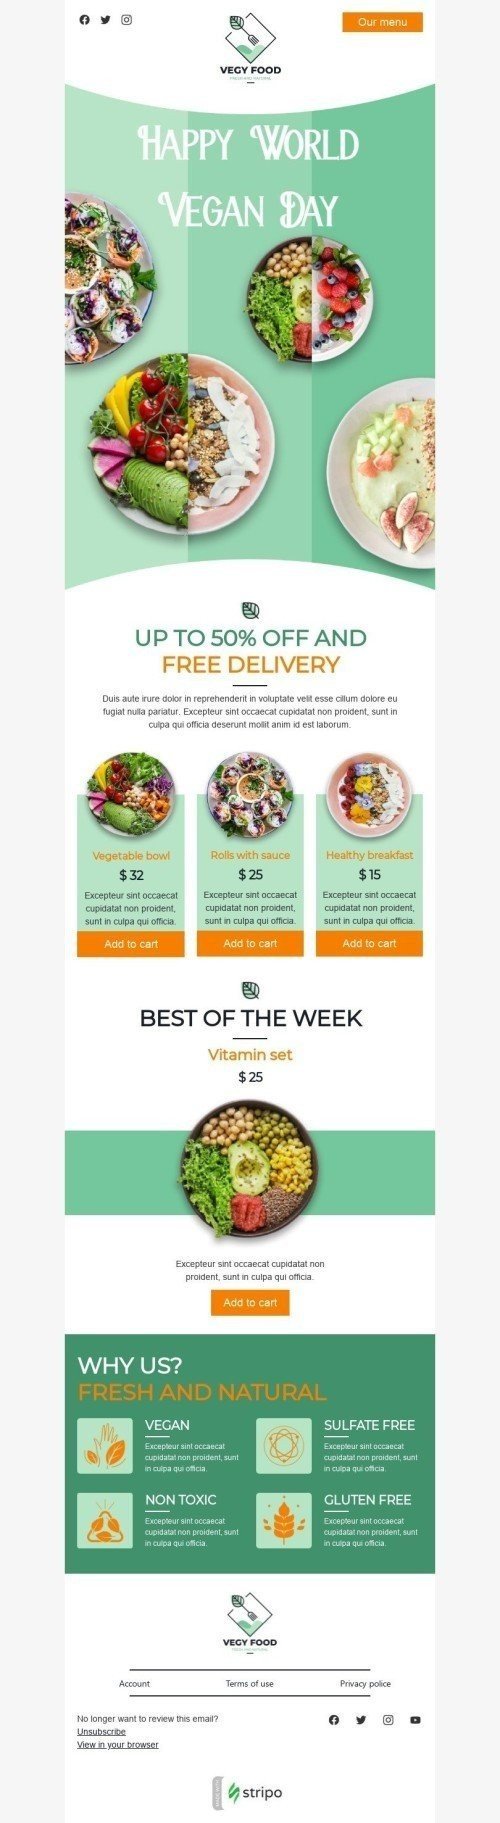 World Vegan Day Email Template «Gluten free» for Food industry desktop view